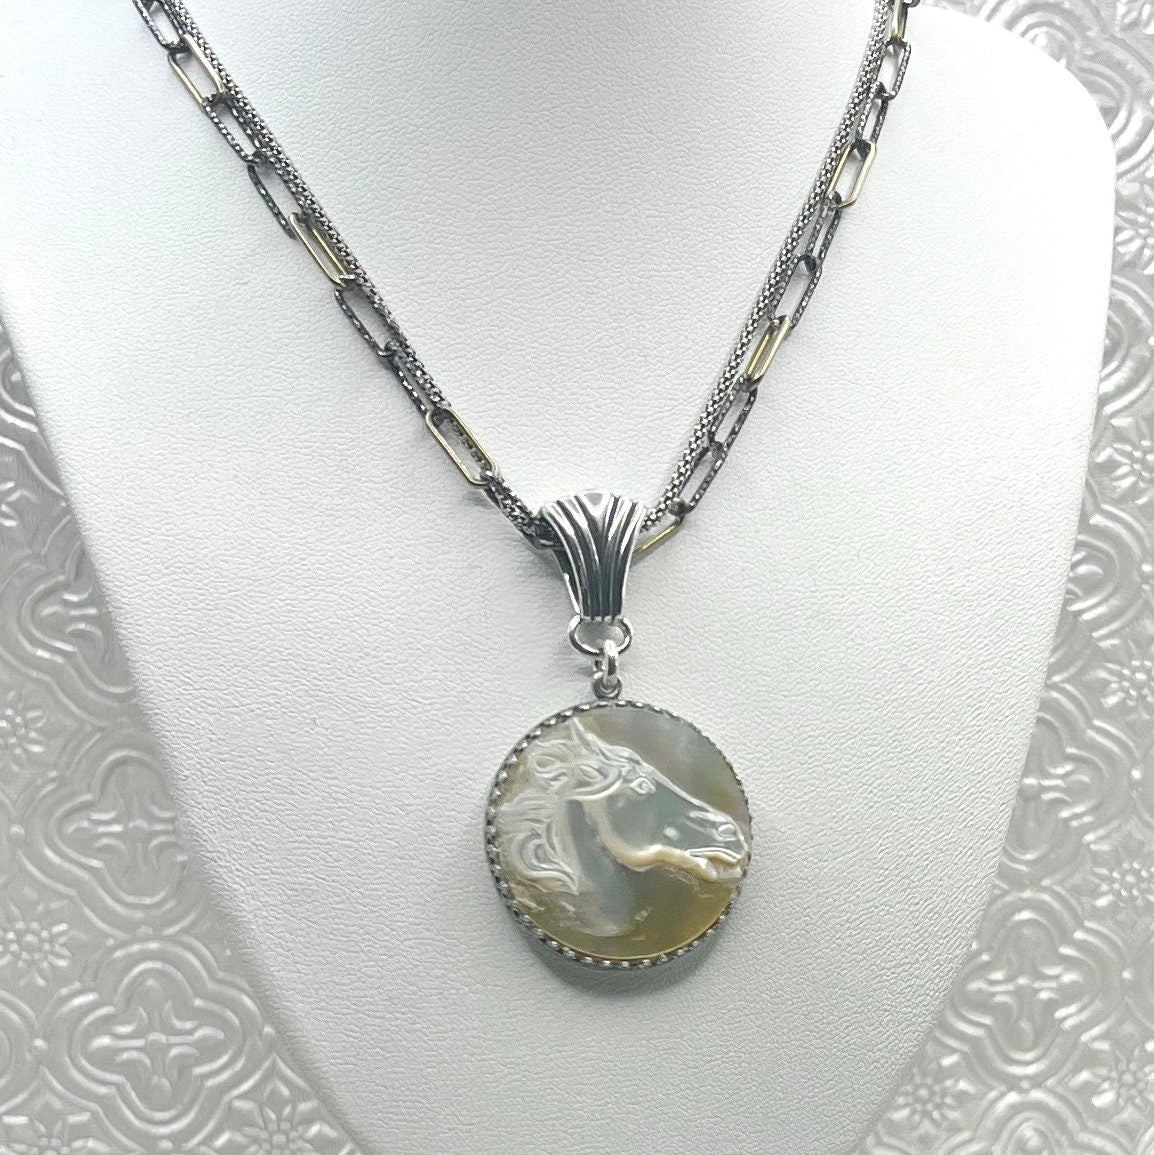 Vintage Horse Cameo Necklace, Horse Jewelry, Mother of Pearl Shell, Equestrian Jewelry, Unique Equine Gifts for Women, Elegant Cameo